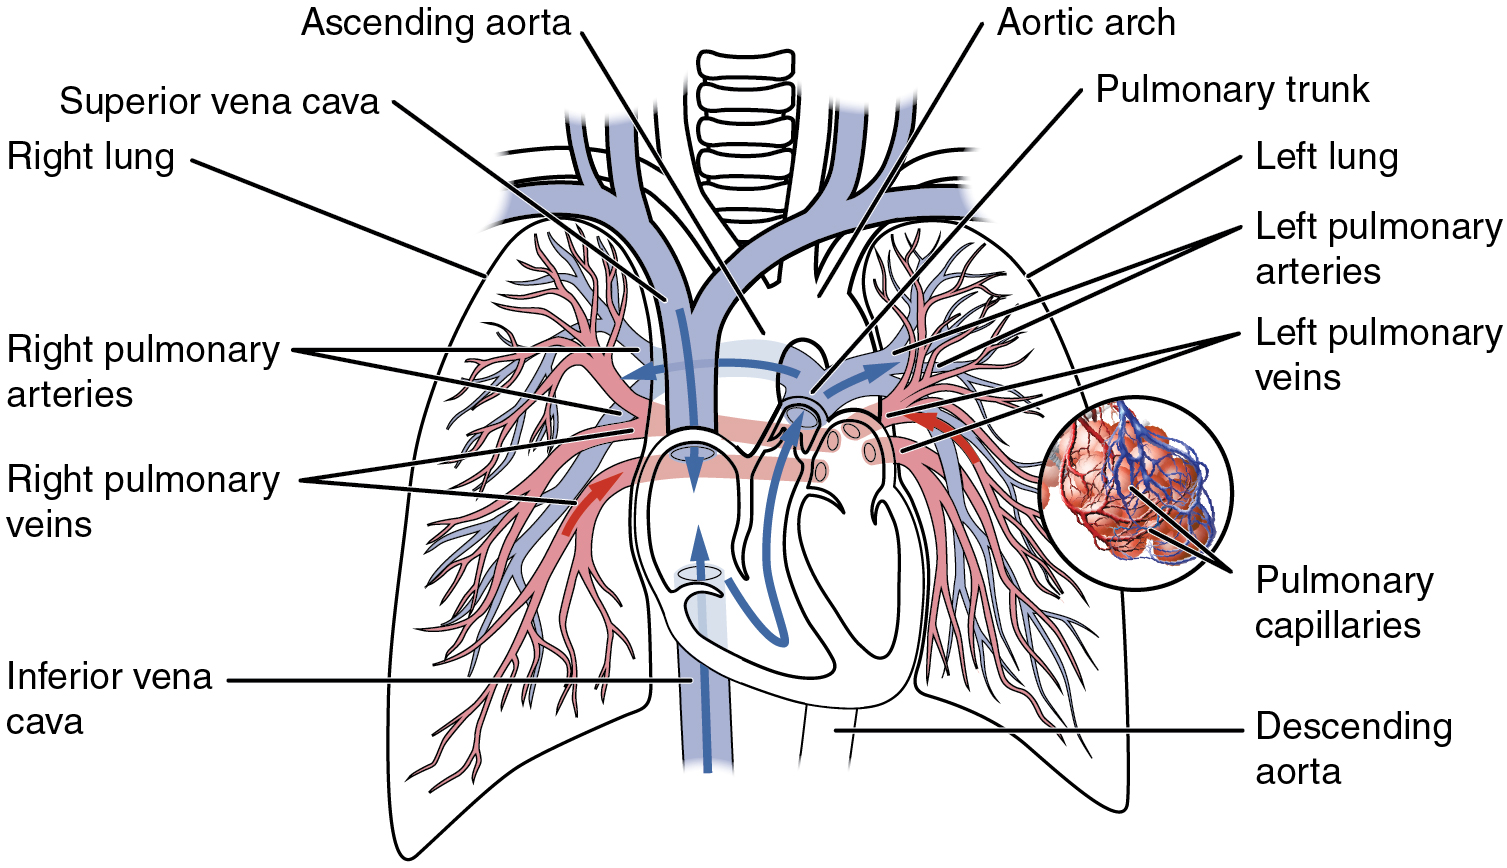 The pulmonary circulation as it passes from the heart. Showing both the pulmonary and bronchial arteries.